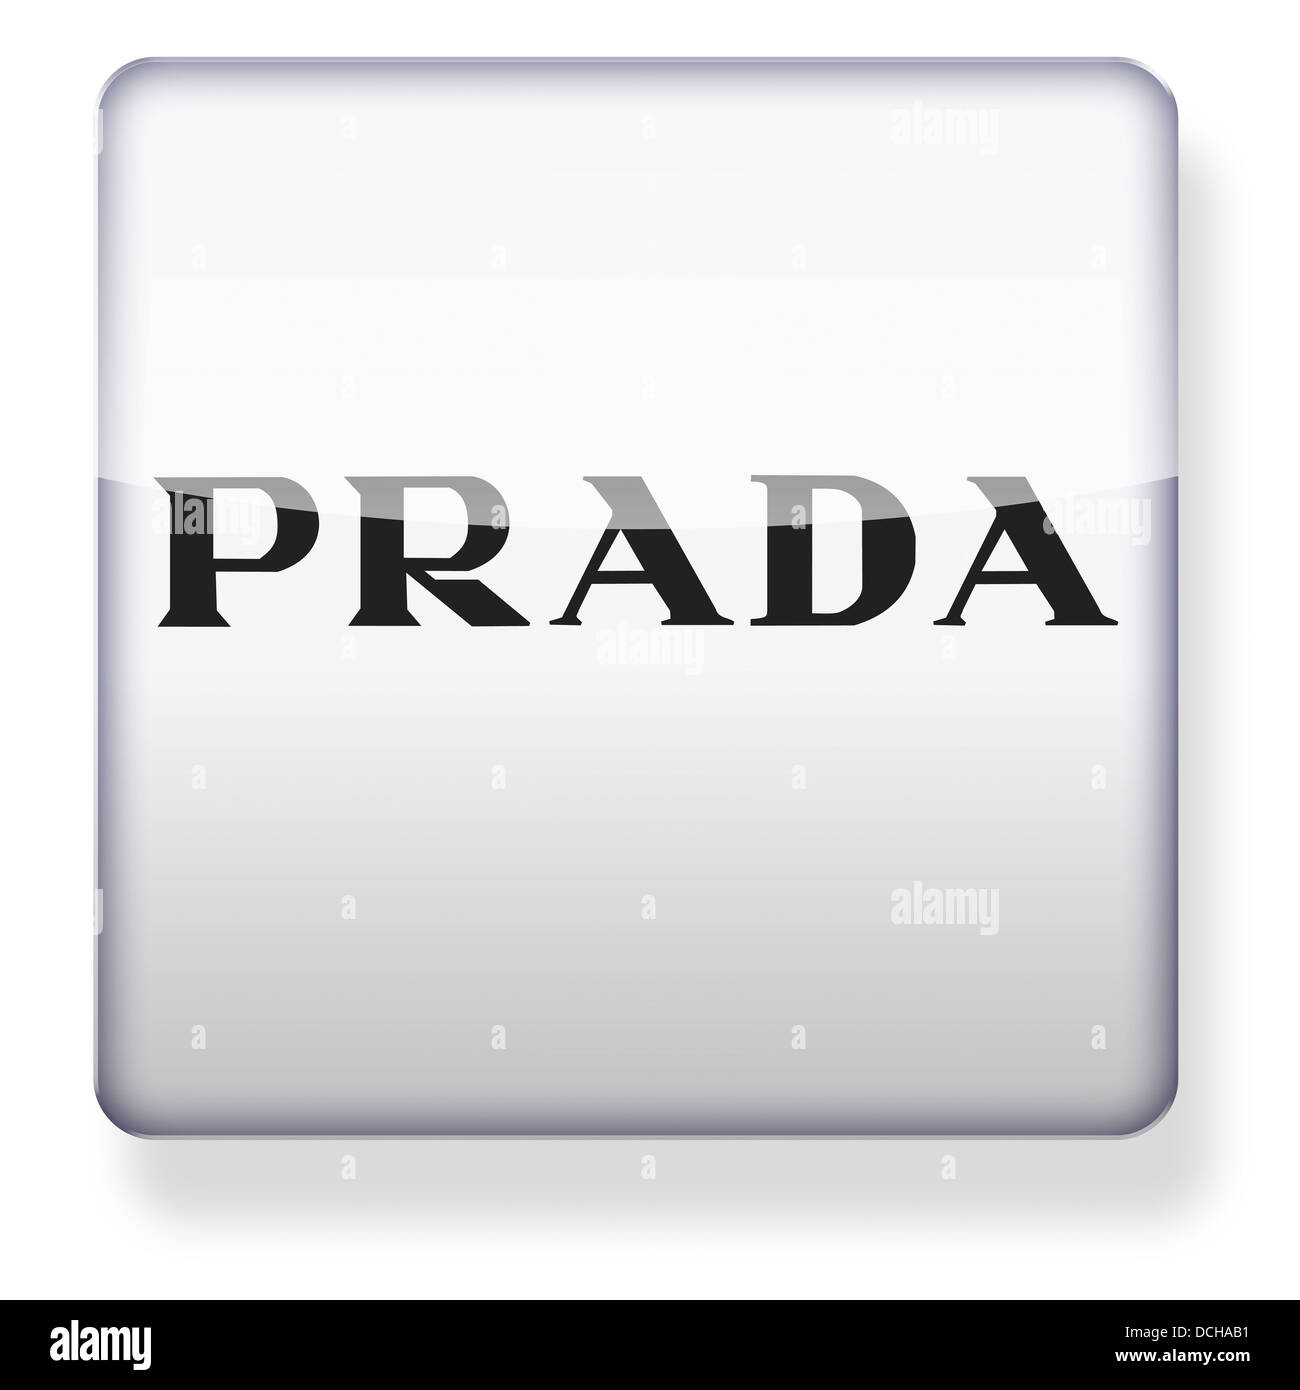 Prada logo as an app icon. Clipping path included Stock Photo - Alamy